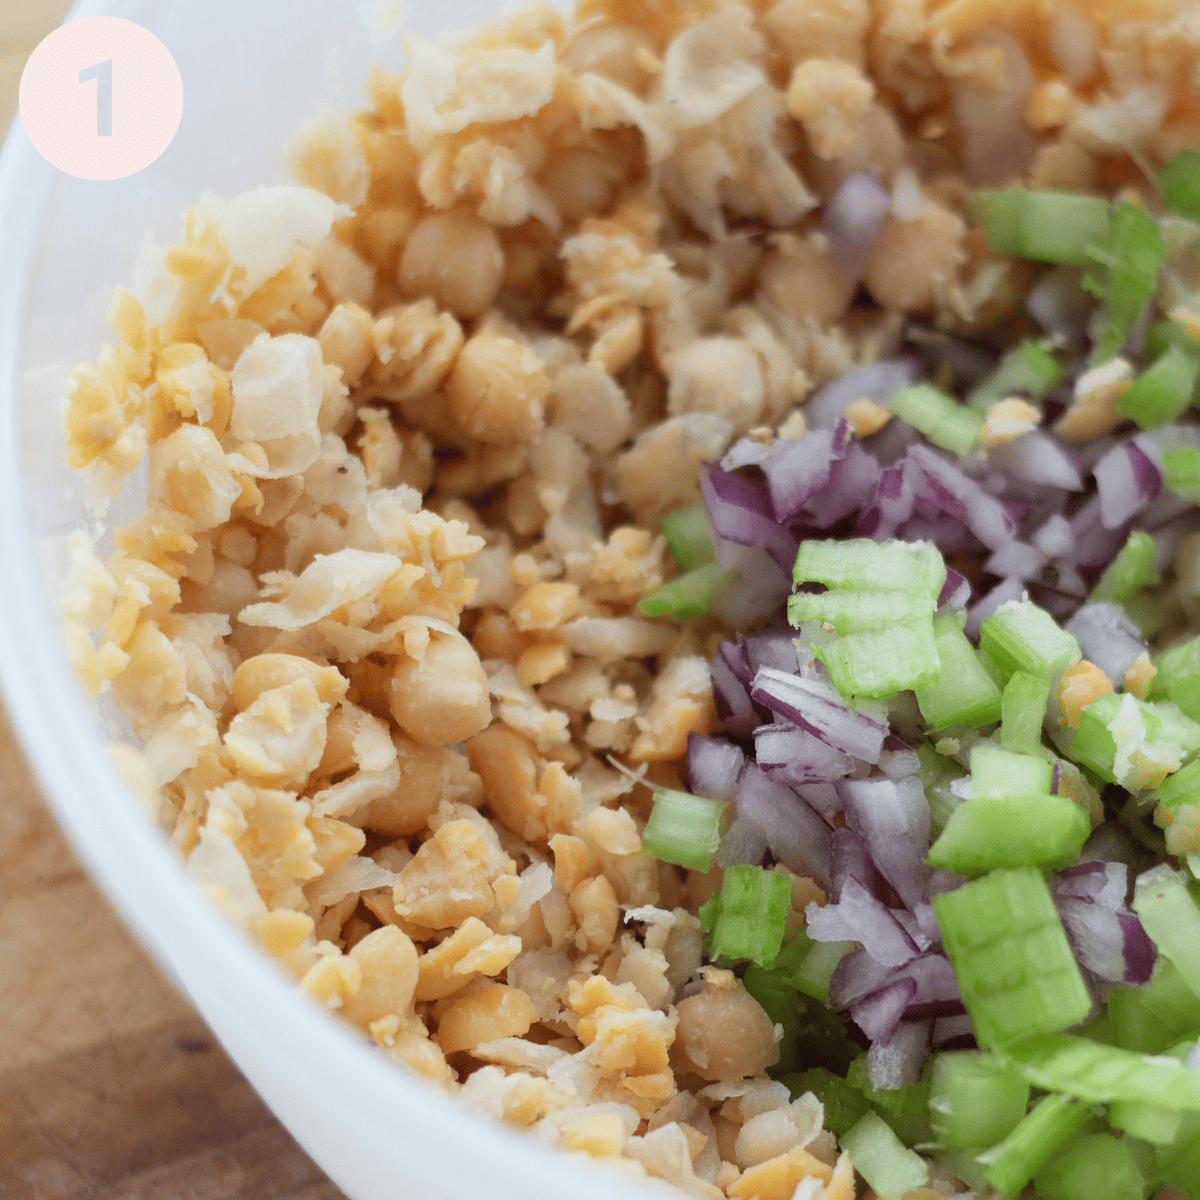 Mixing the mashed up chickpeas with chopped onion and celery.